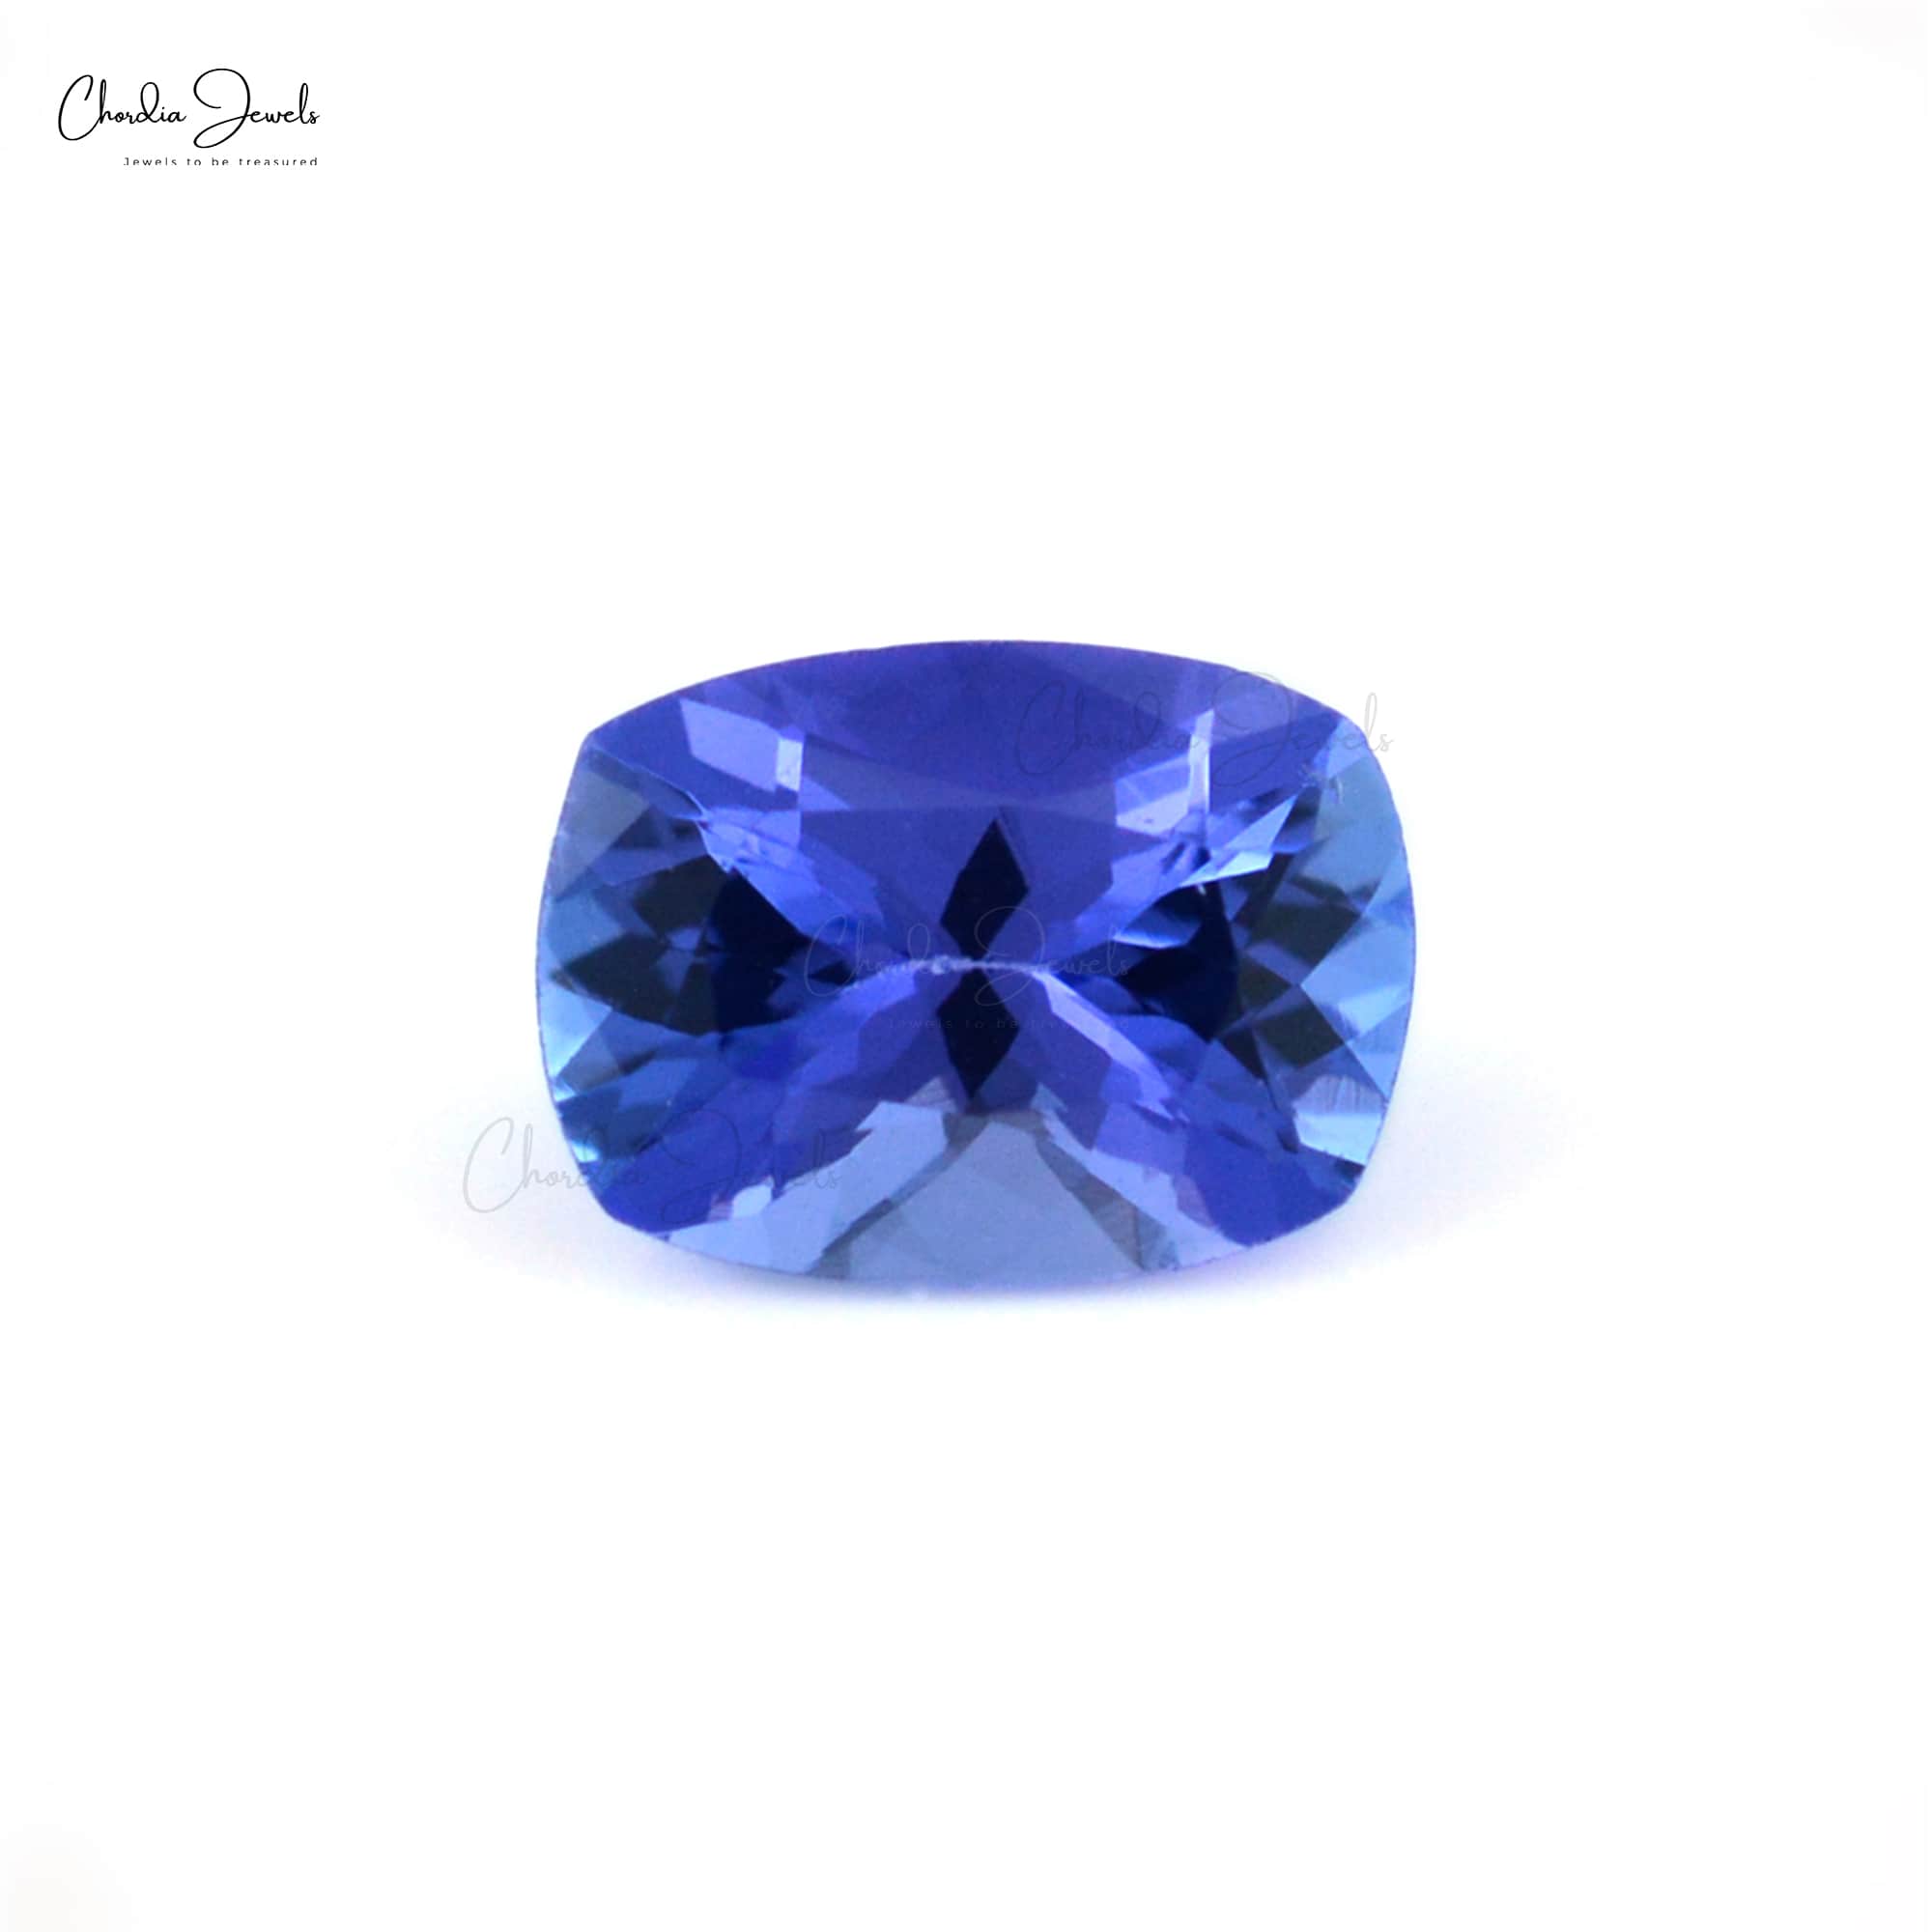 Buy the Best and most Natural Tanzanite Stone OnlineFashion and JewelleryGemstonesAll Indiaother